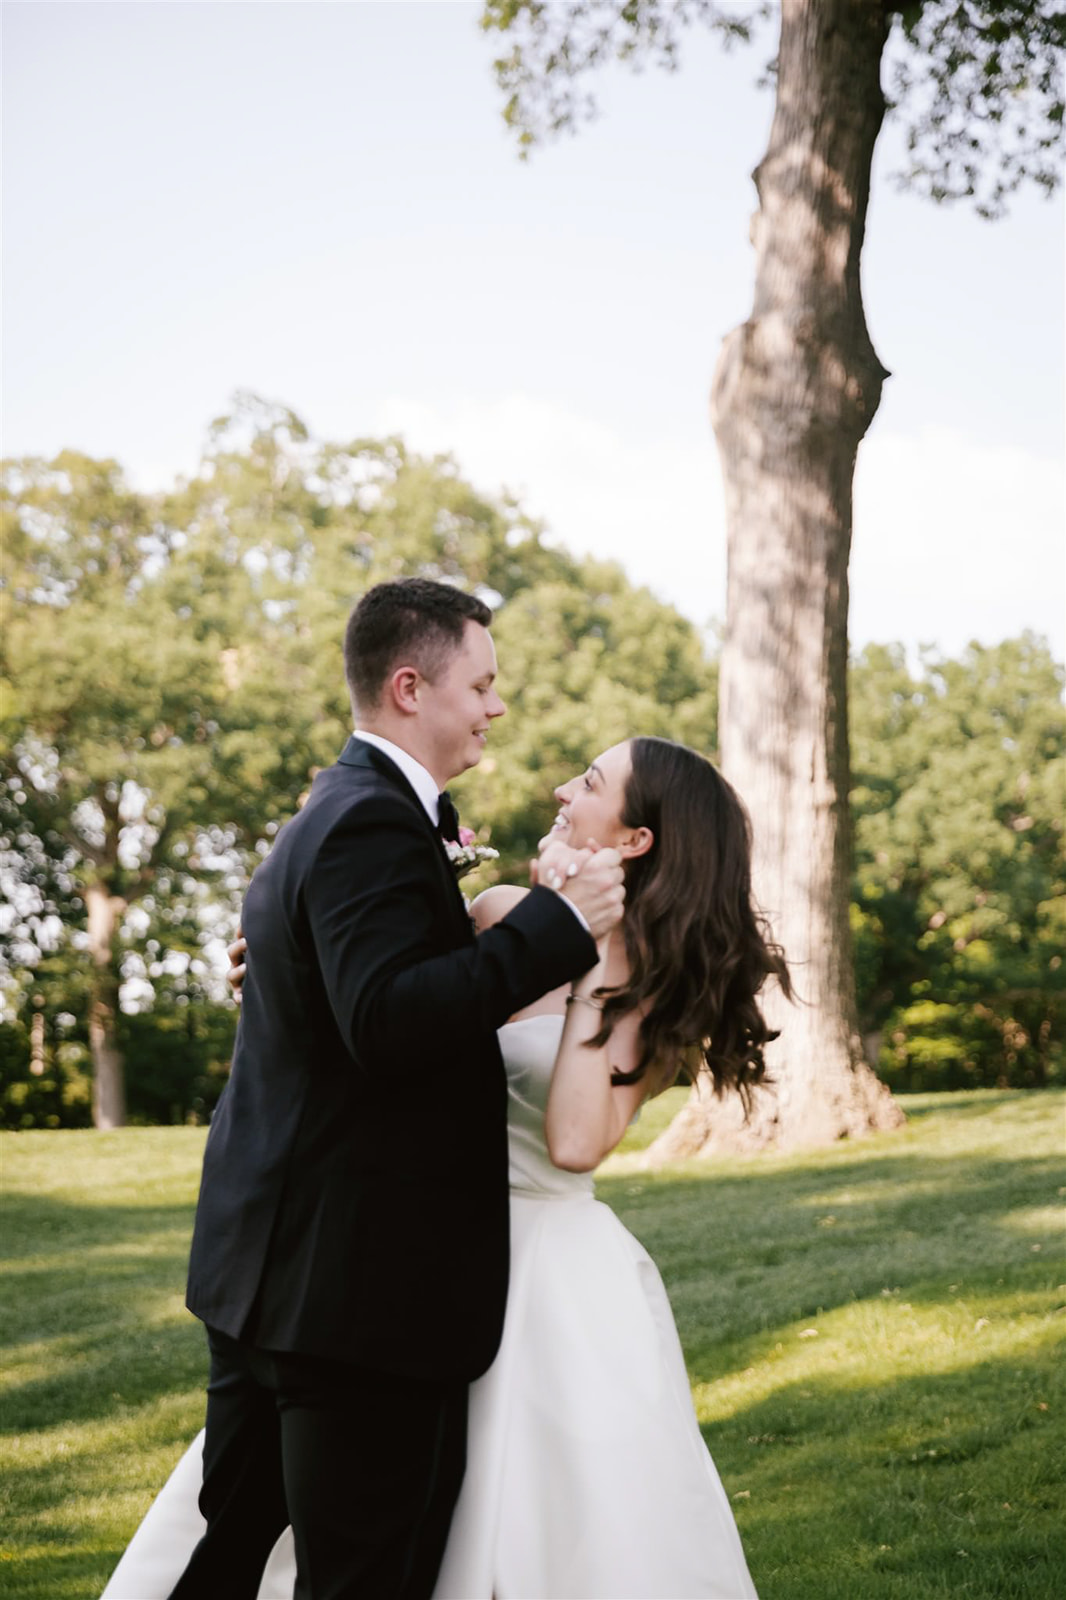 Dancing into the sunset, the bride and groom share a romantic moment enveloped in the warm glow of evening light.